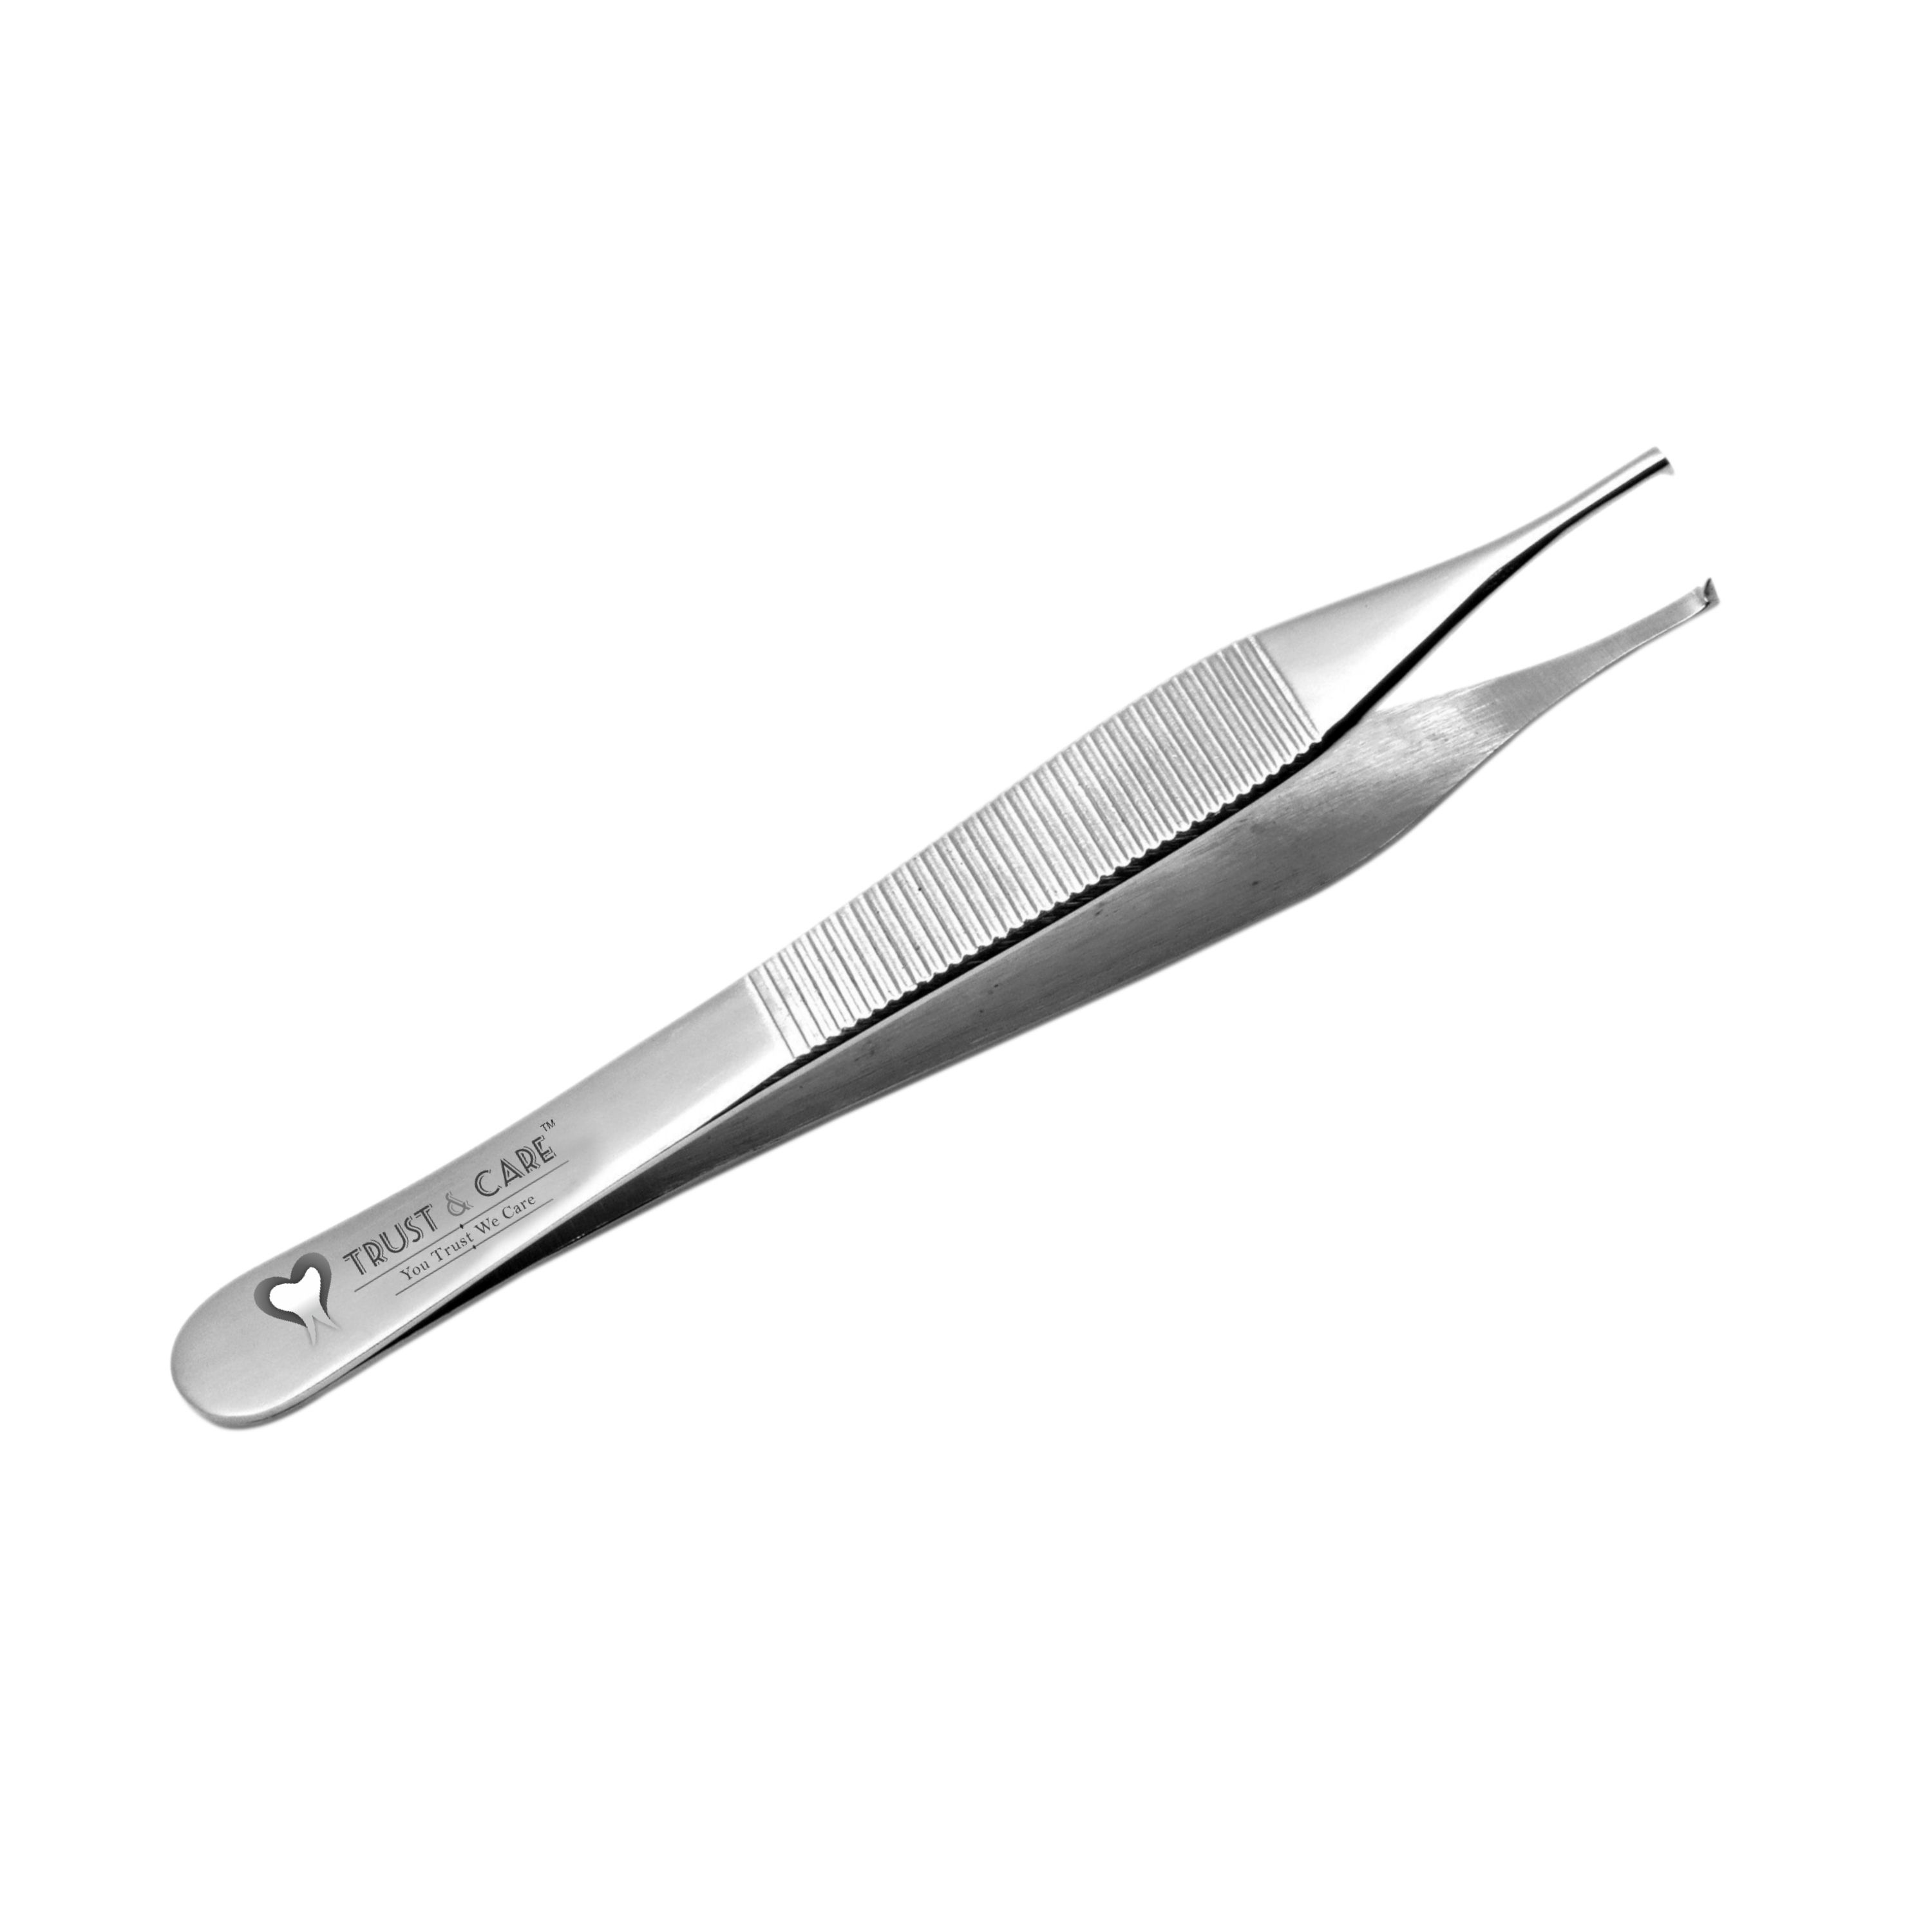 Trust & Care Tissue Adson Forcep With Tooth Small